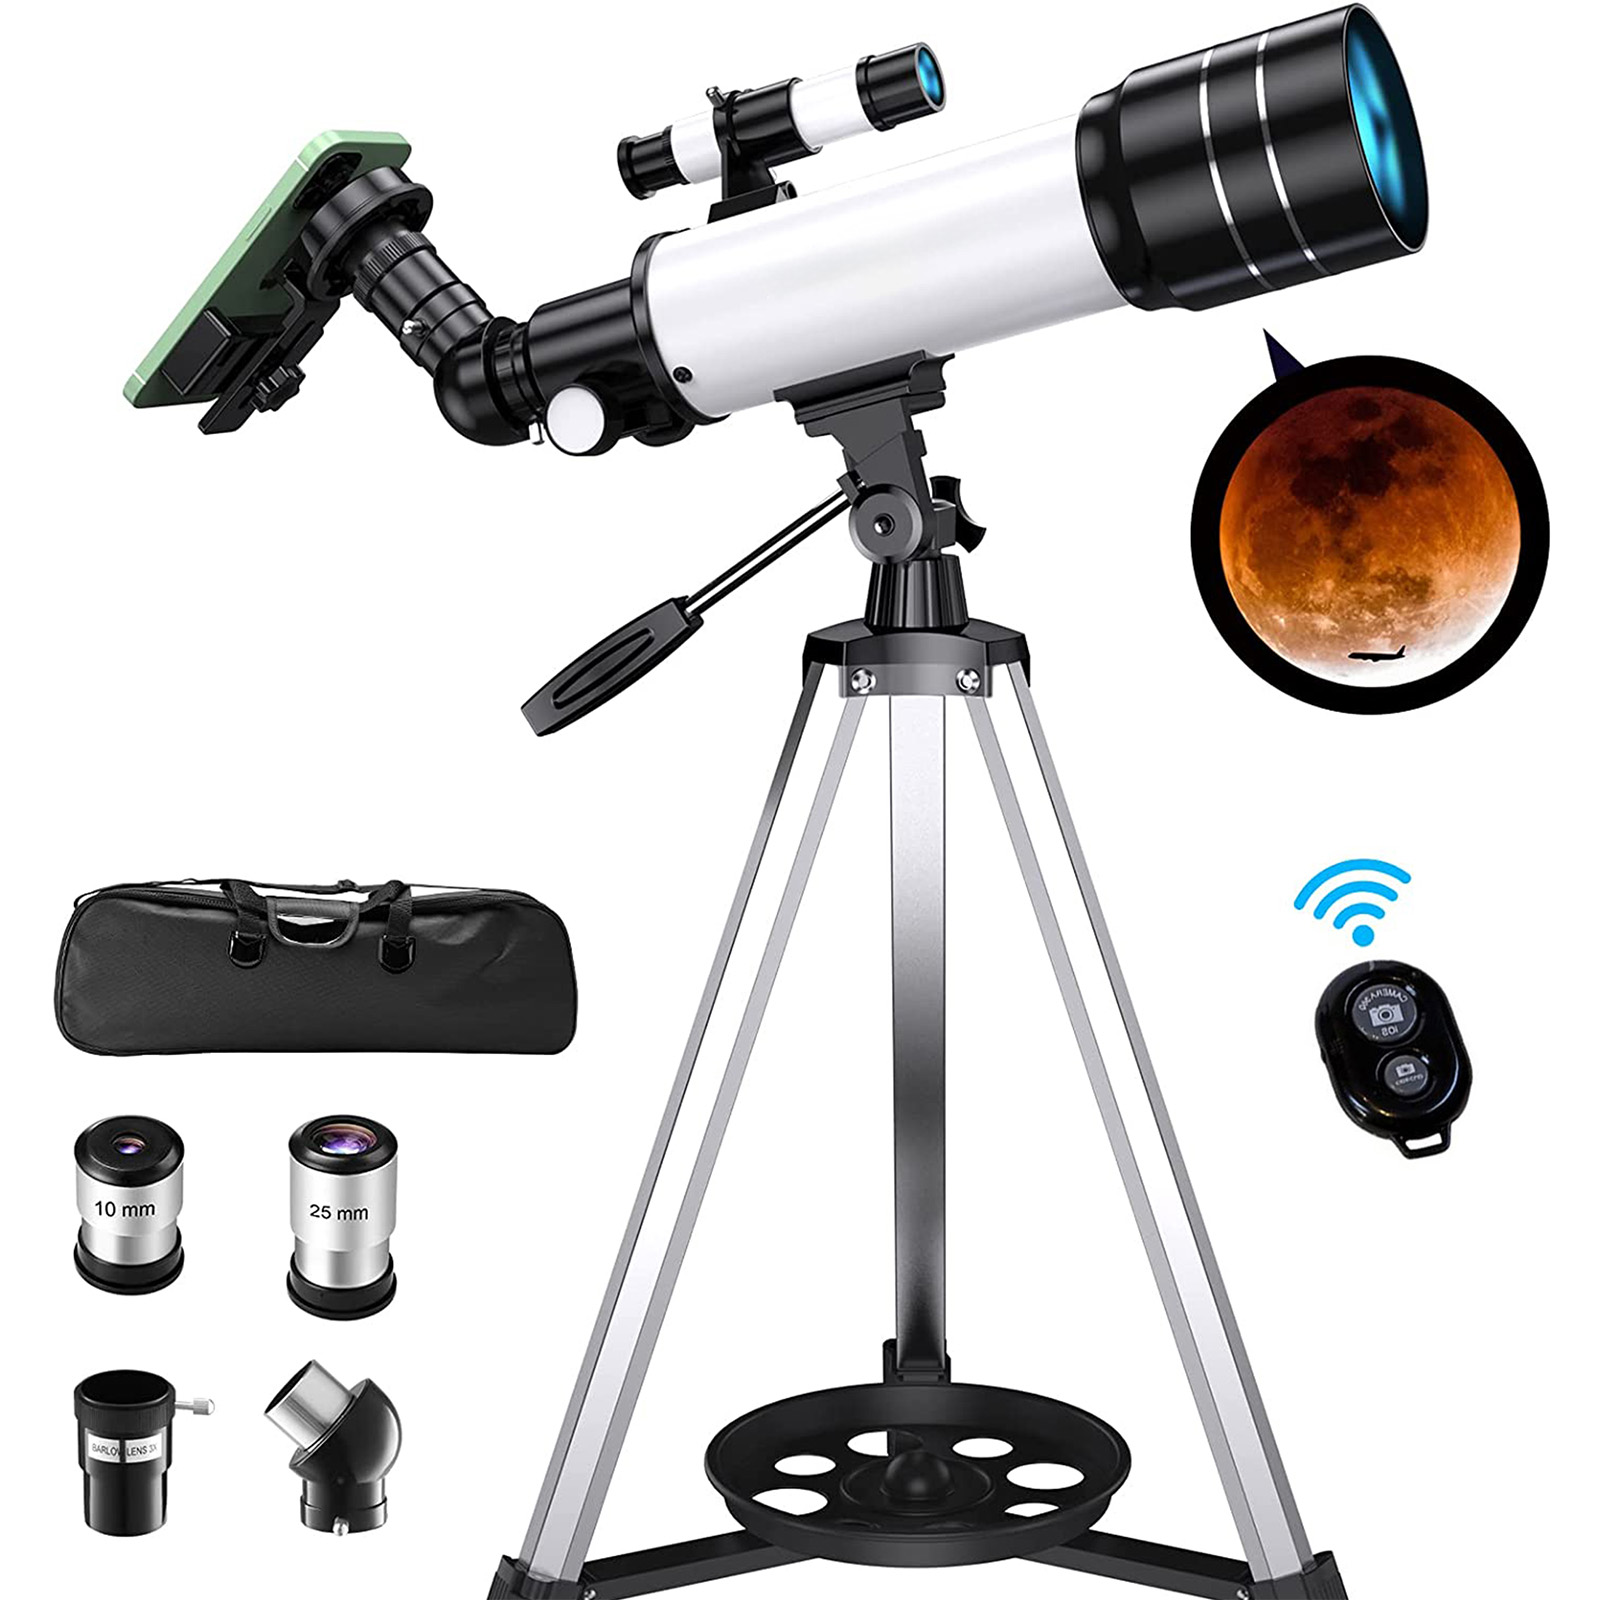 SUGIFT Telescope for Kids and Beginners 70mm Aperture 400mm AZ Mount Telescope with Tripod, Silver - image 1 of 7